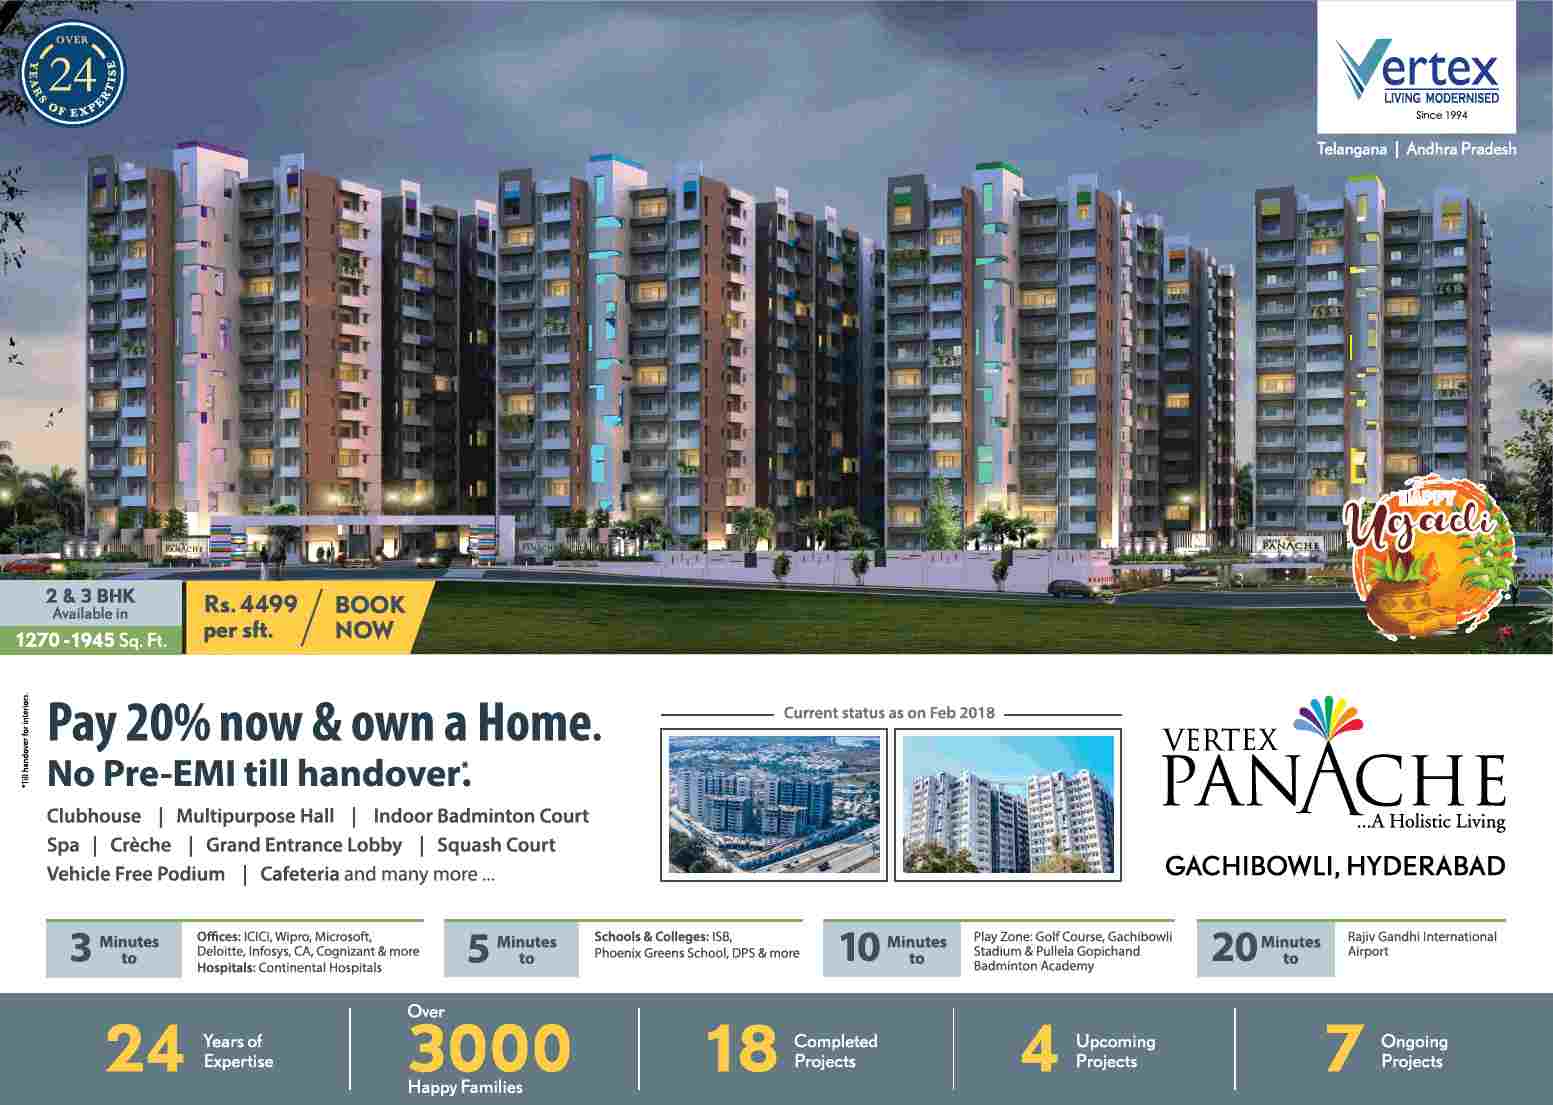 Pay 20% now & own a home with pre-EMI offer till handover at Vertex Panache in Hyderabad